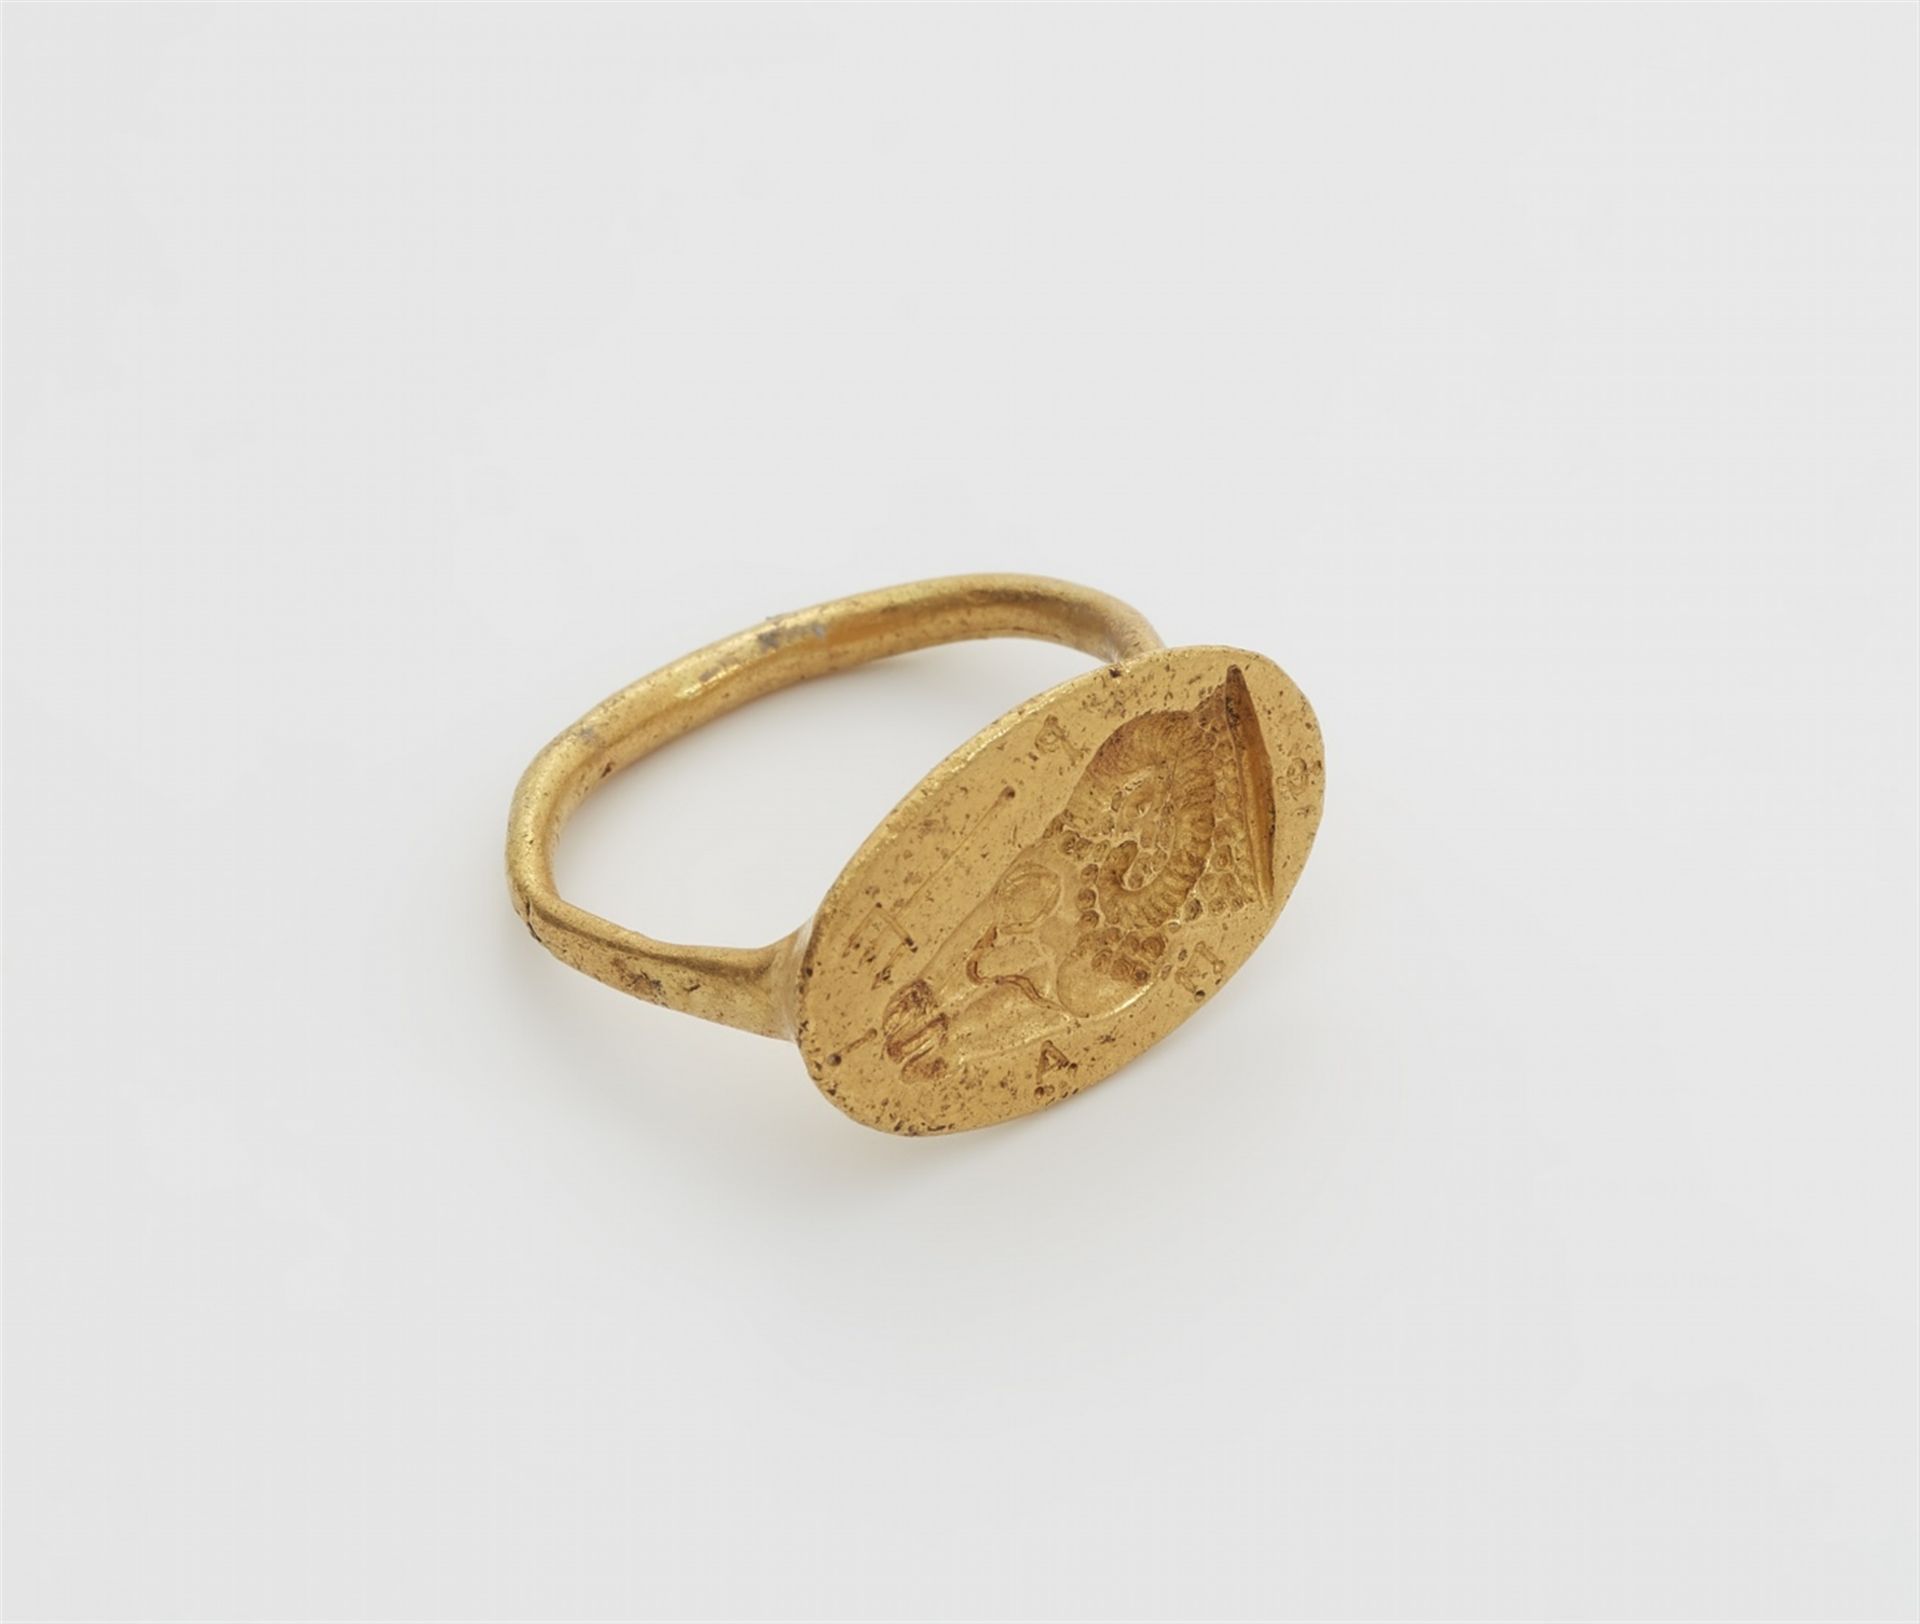 A 22k gold seal ring after a Hellenistic model